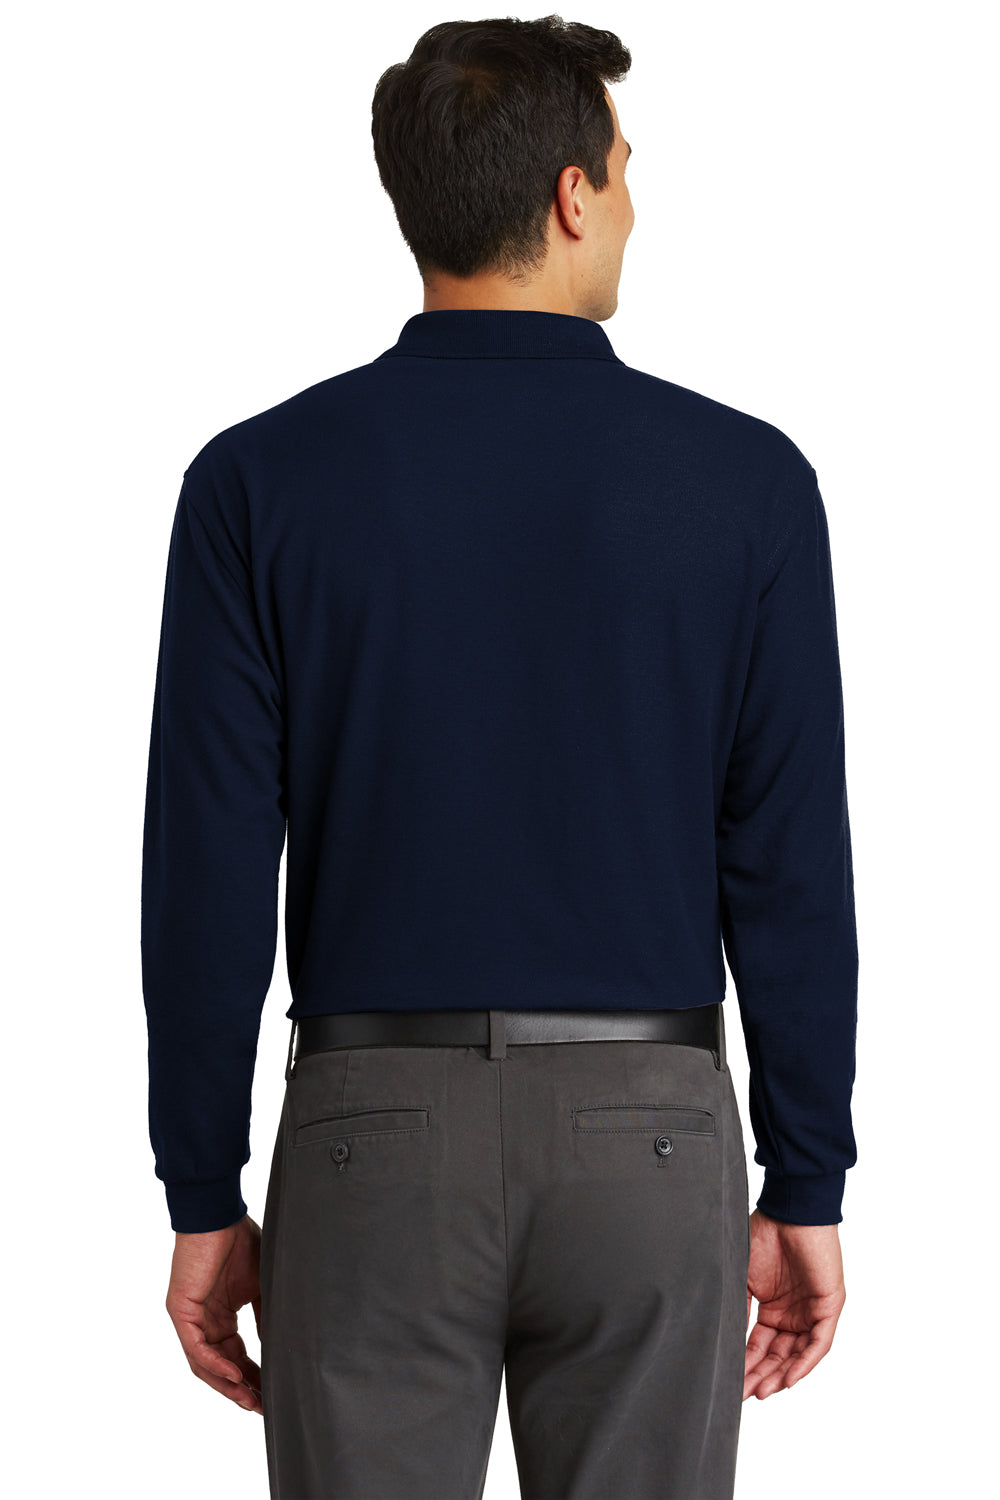 Port Authority K500LSP Mens Silk Touch Wrinkle Resistant Long Sleeve Polo Shirt w/ Pocket Navy Blue Back